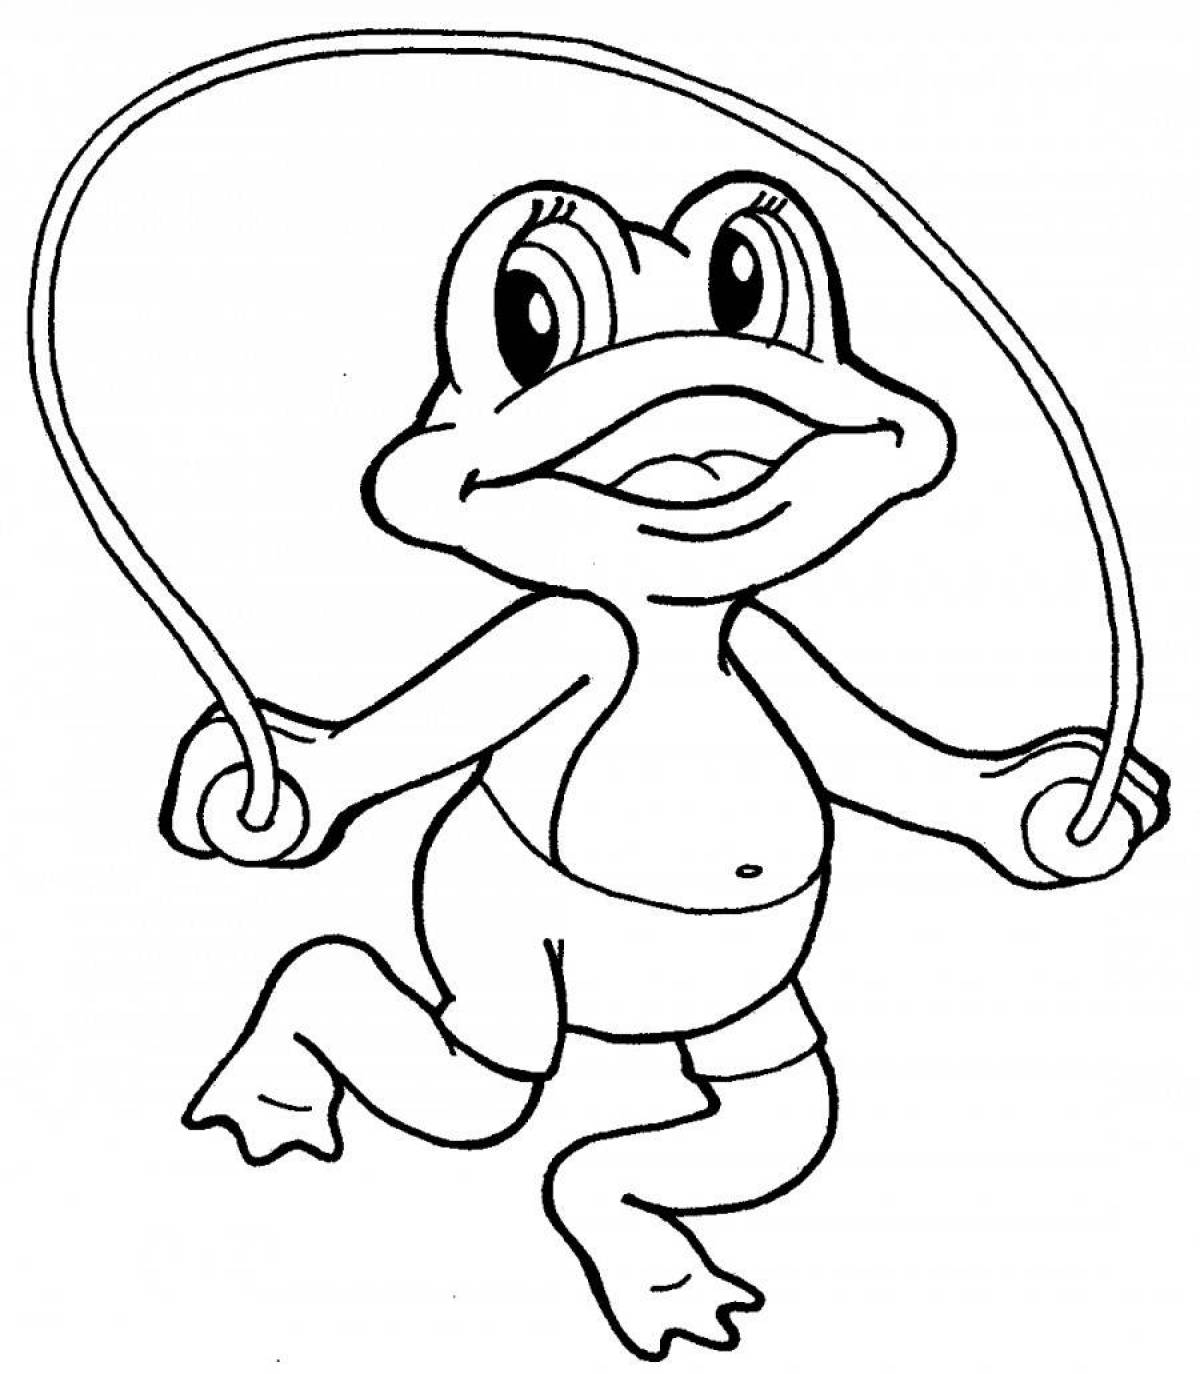 Happy frog coloring book for kids